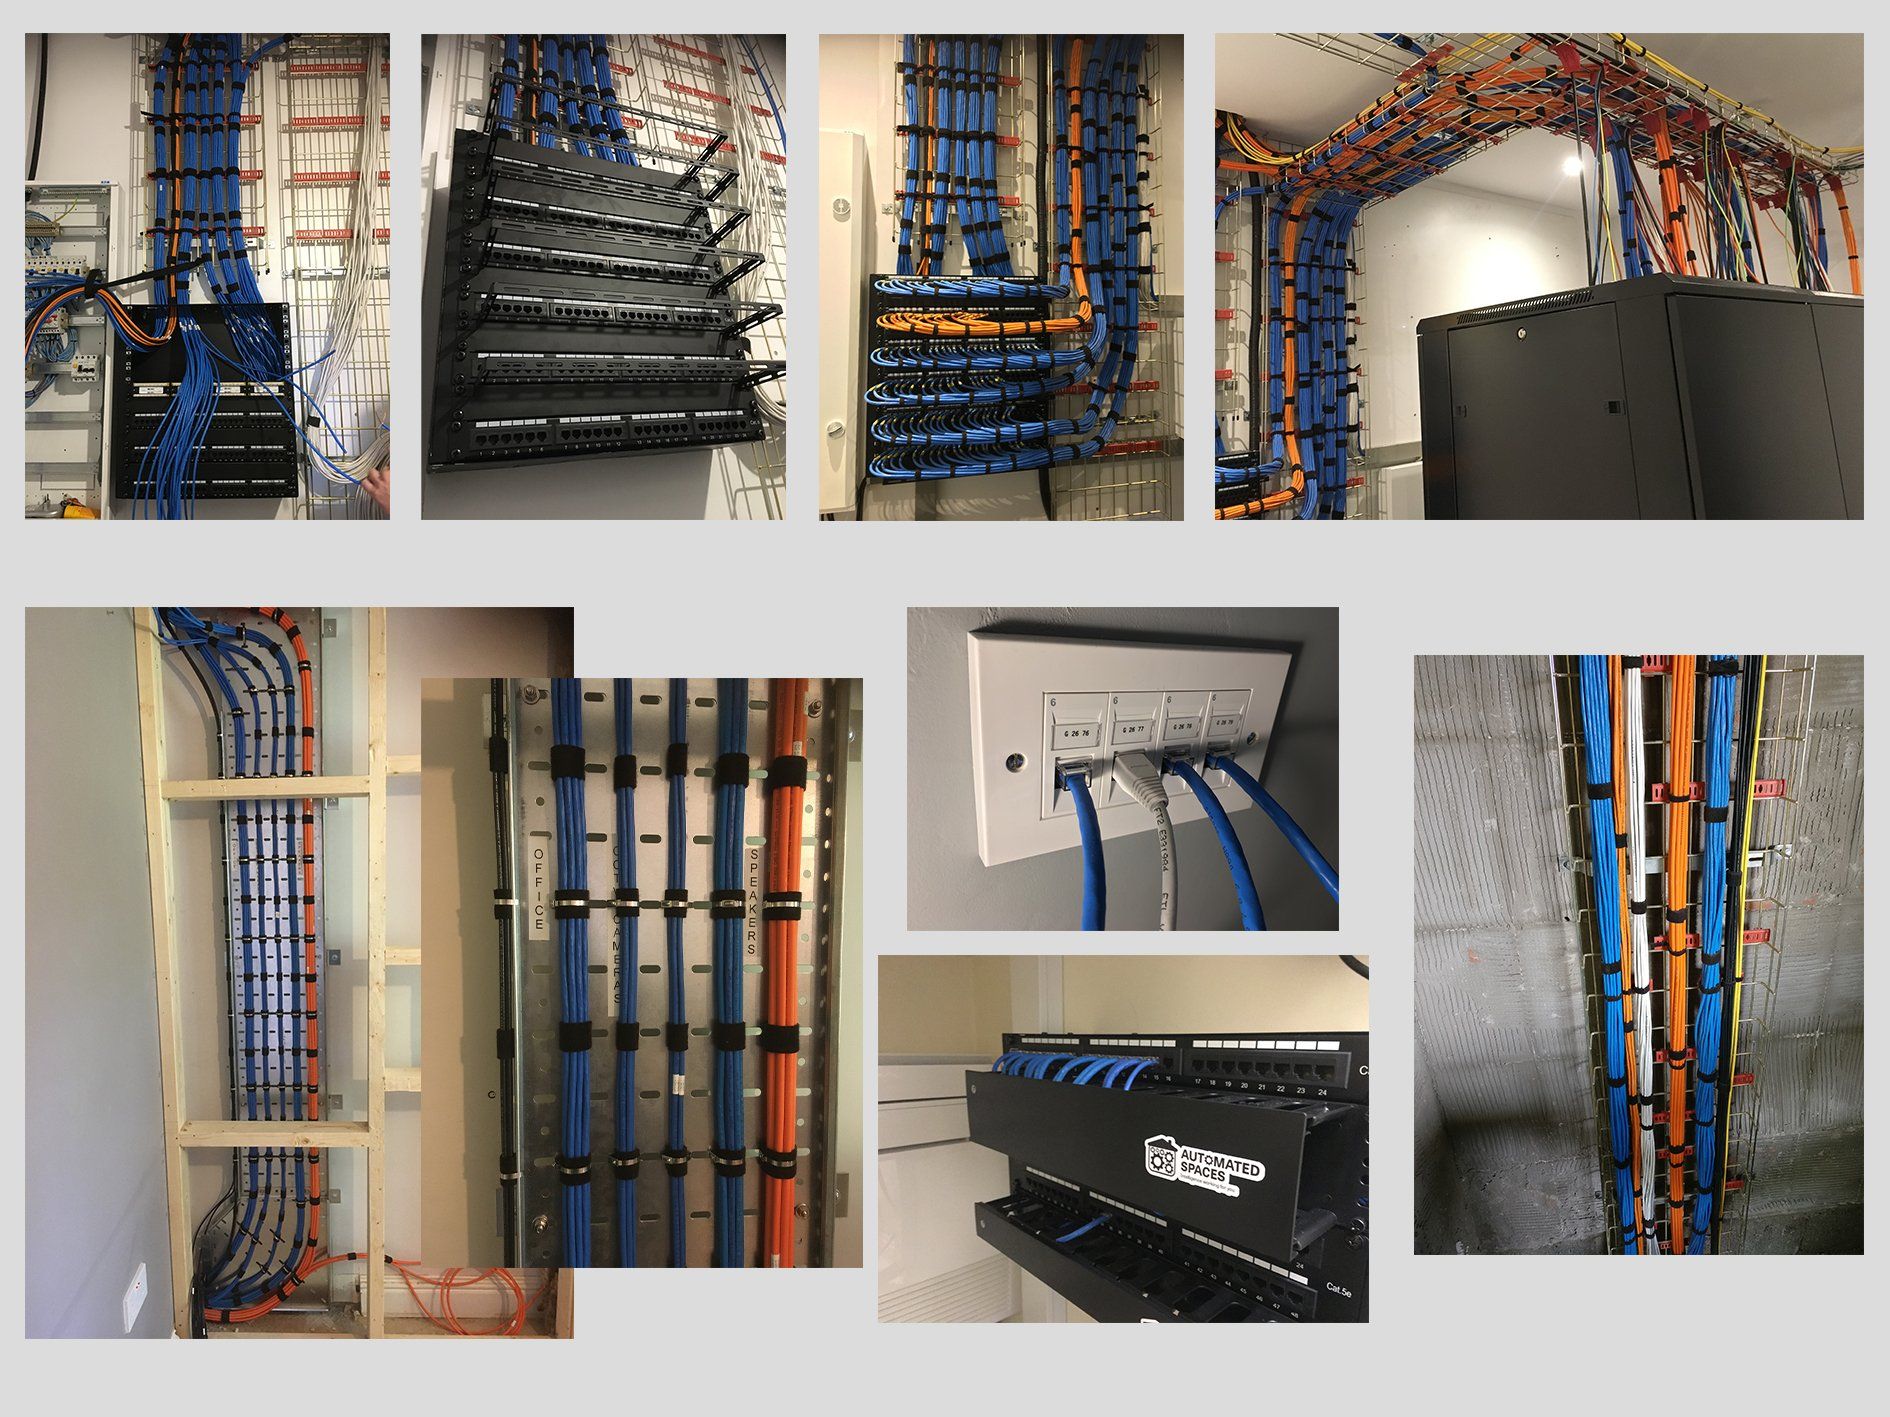 Photograph of some of Automated Spaces data cable installation onsite work